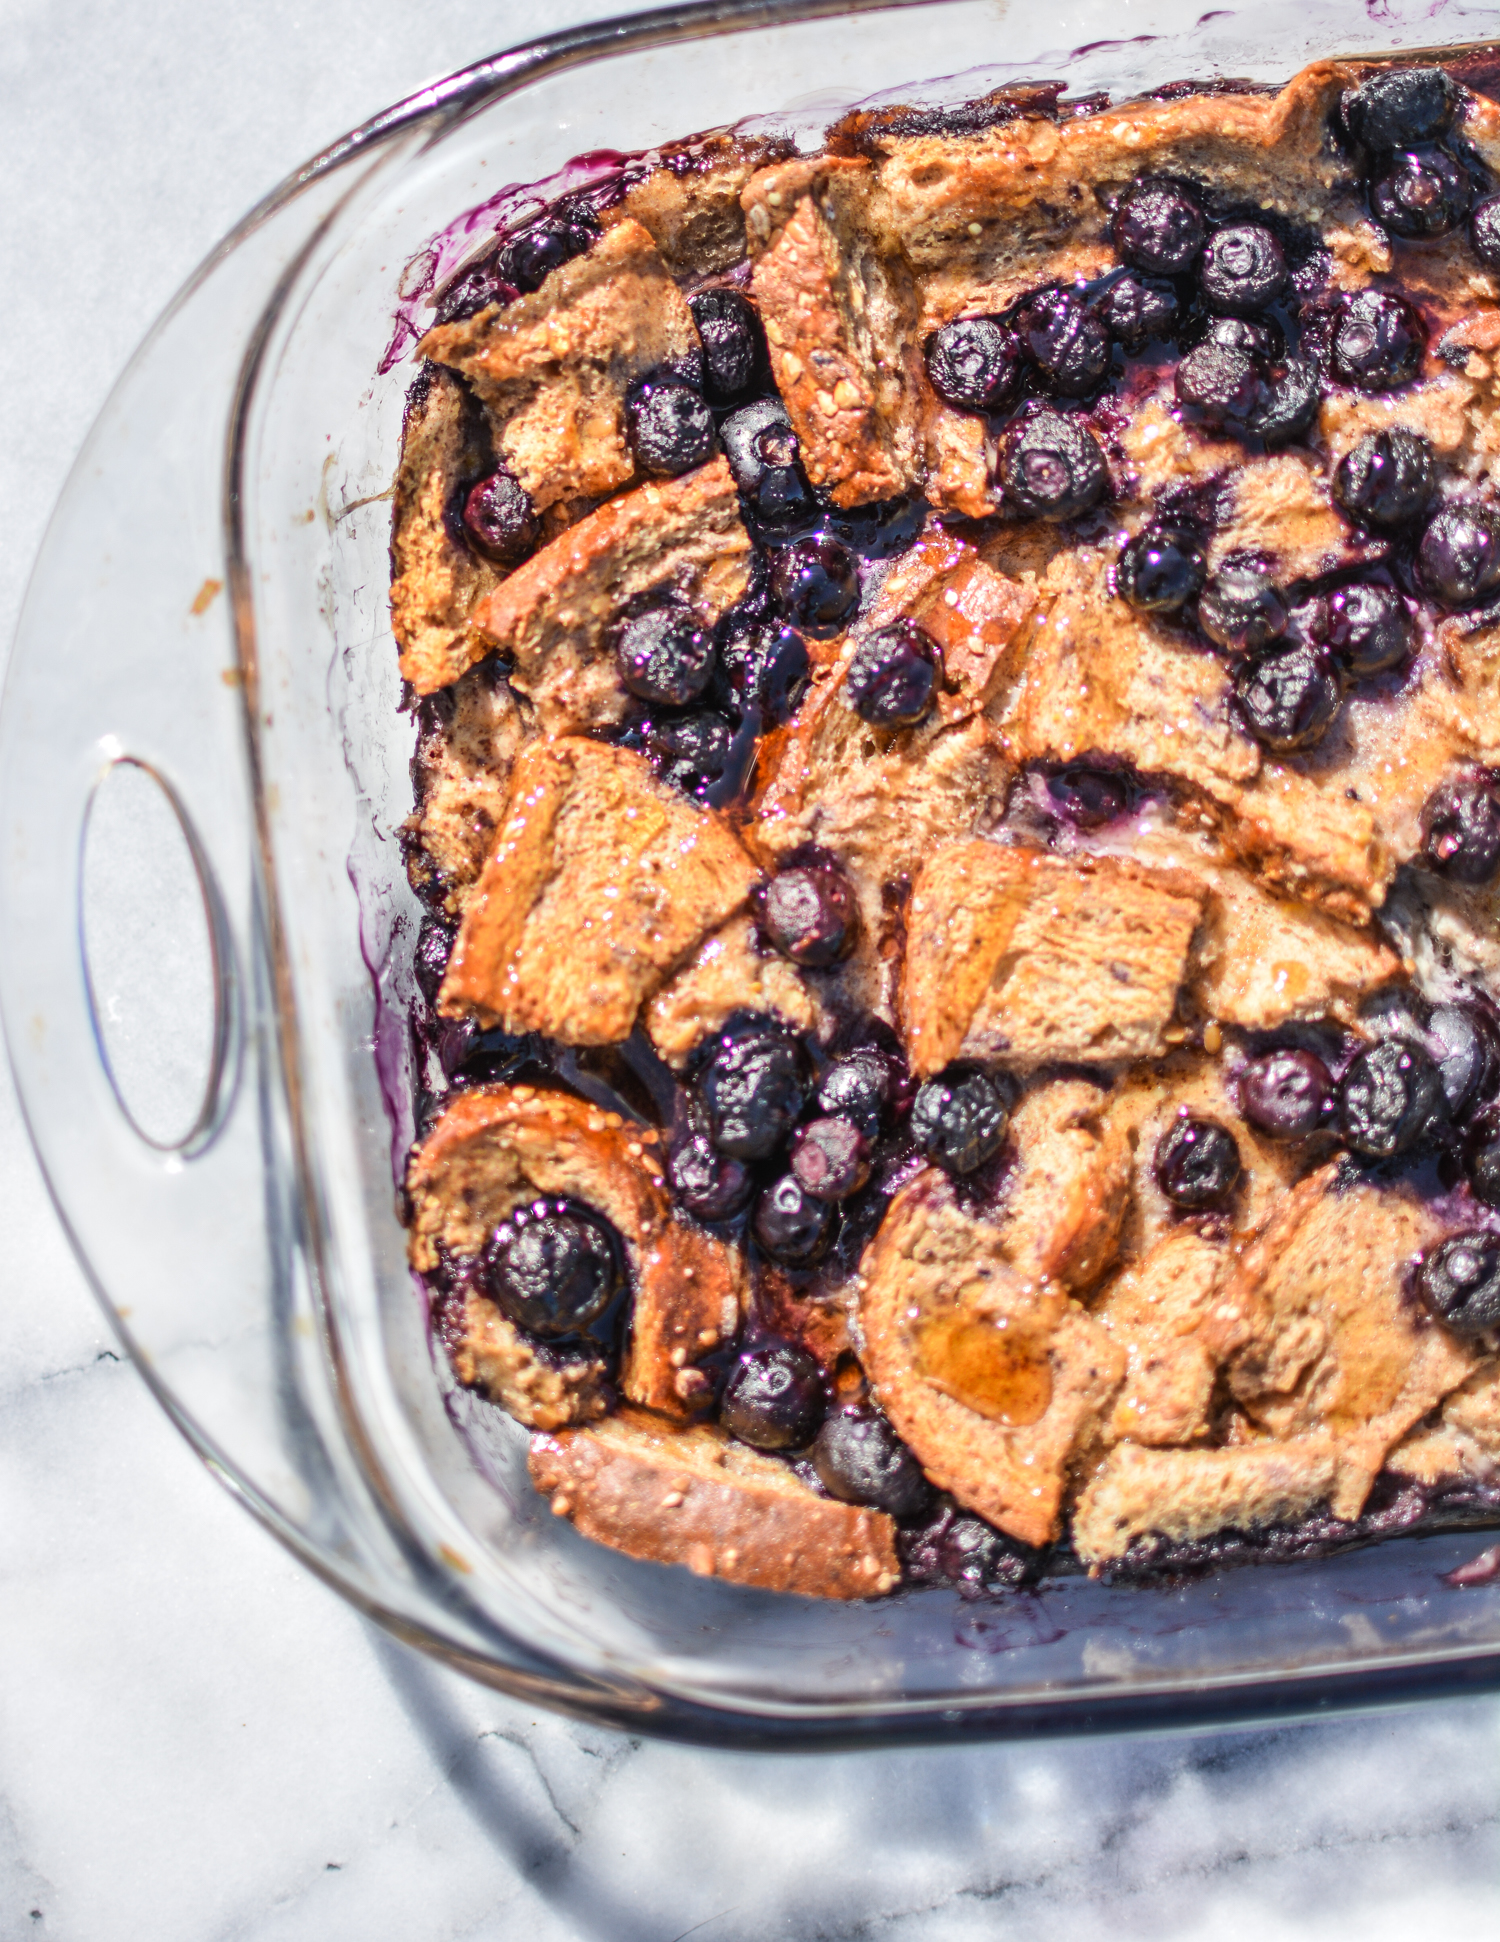 Keep things on the lighter side this Mother's Day with a skinny Blueberry French Toast Casserole made with egg whites, unsweetened almond milk, and berries.